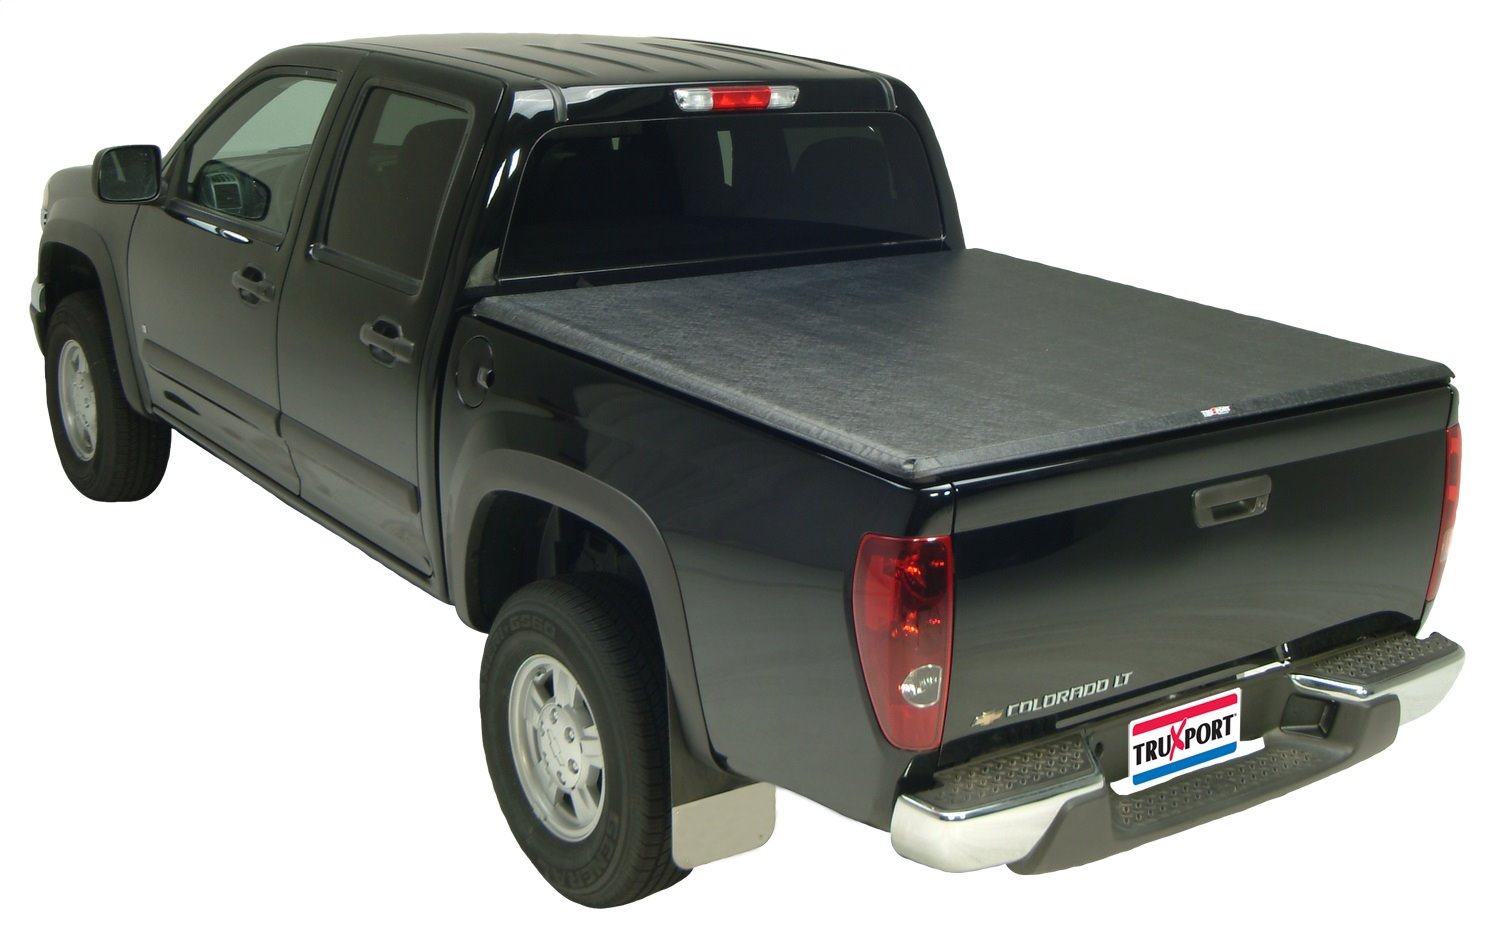 Truxport Soft Roll-Up Tonneau Cover 2004-2012 Colorado/Canyon Pickup